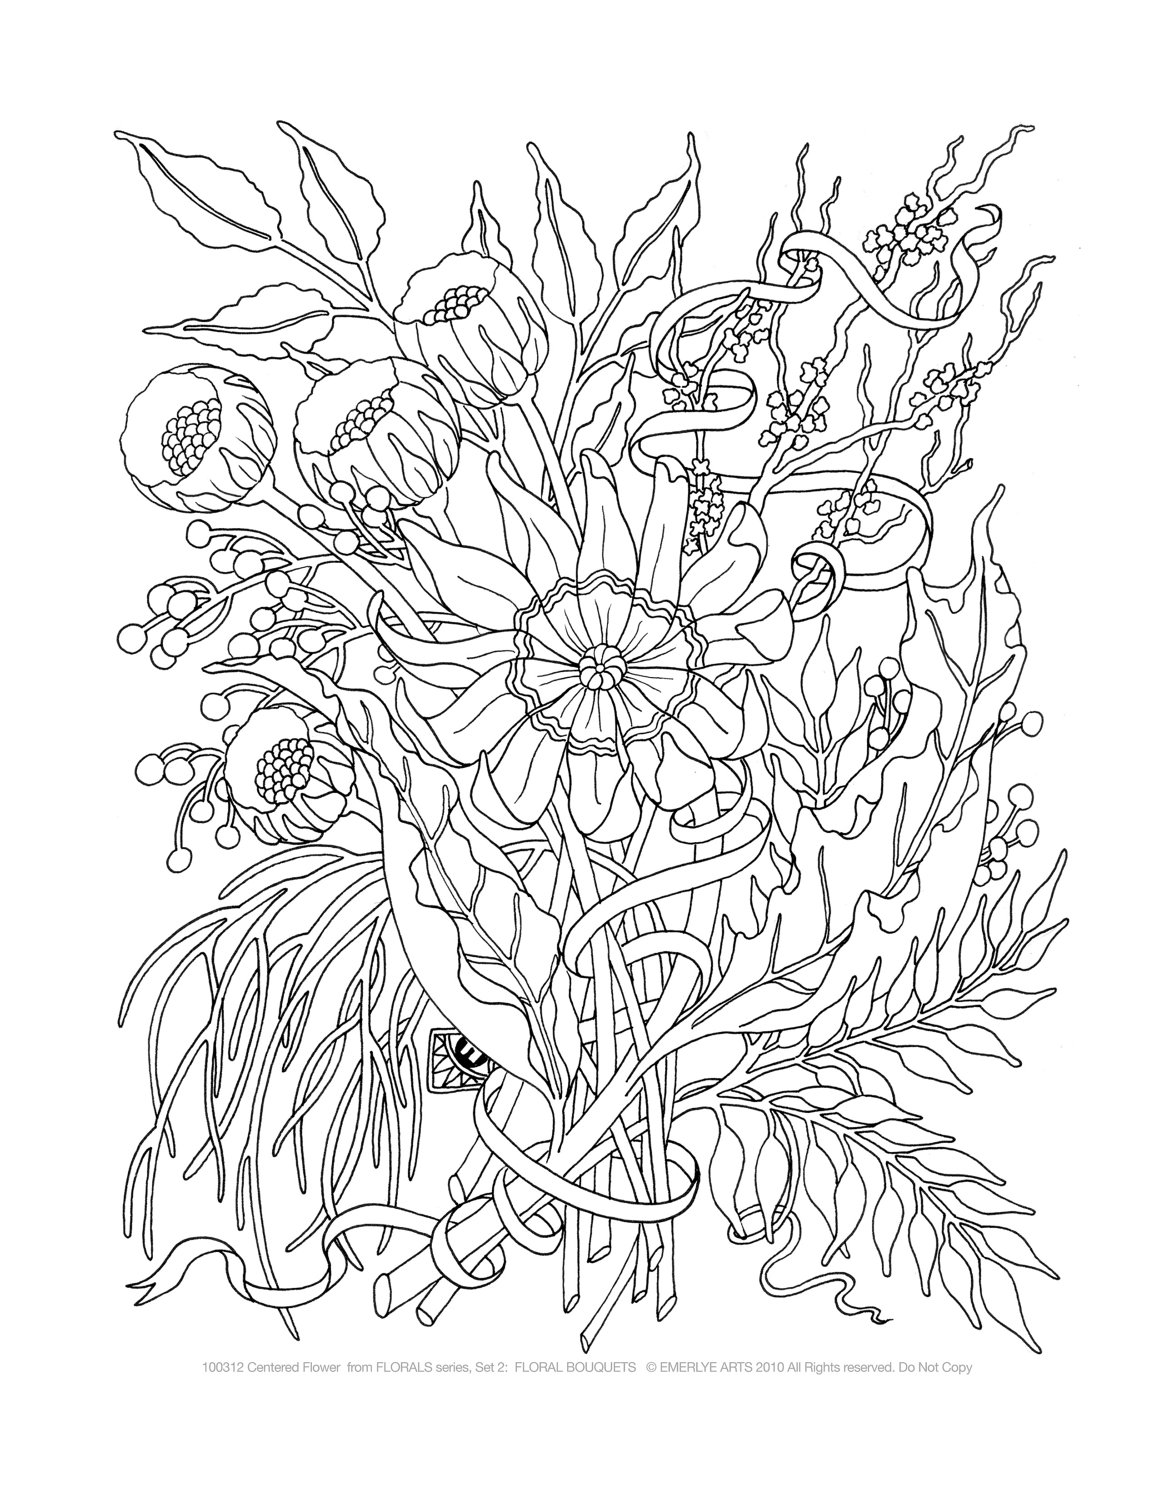 Beautiful Adult coloring page to print and color